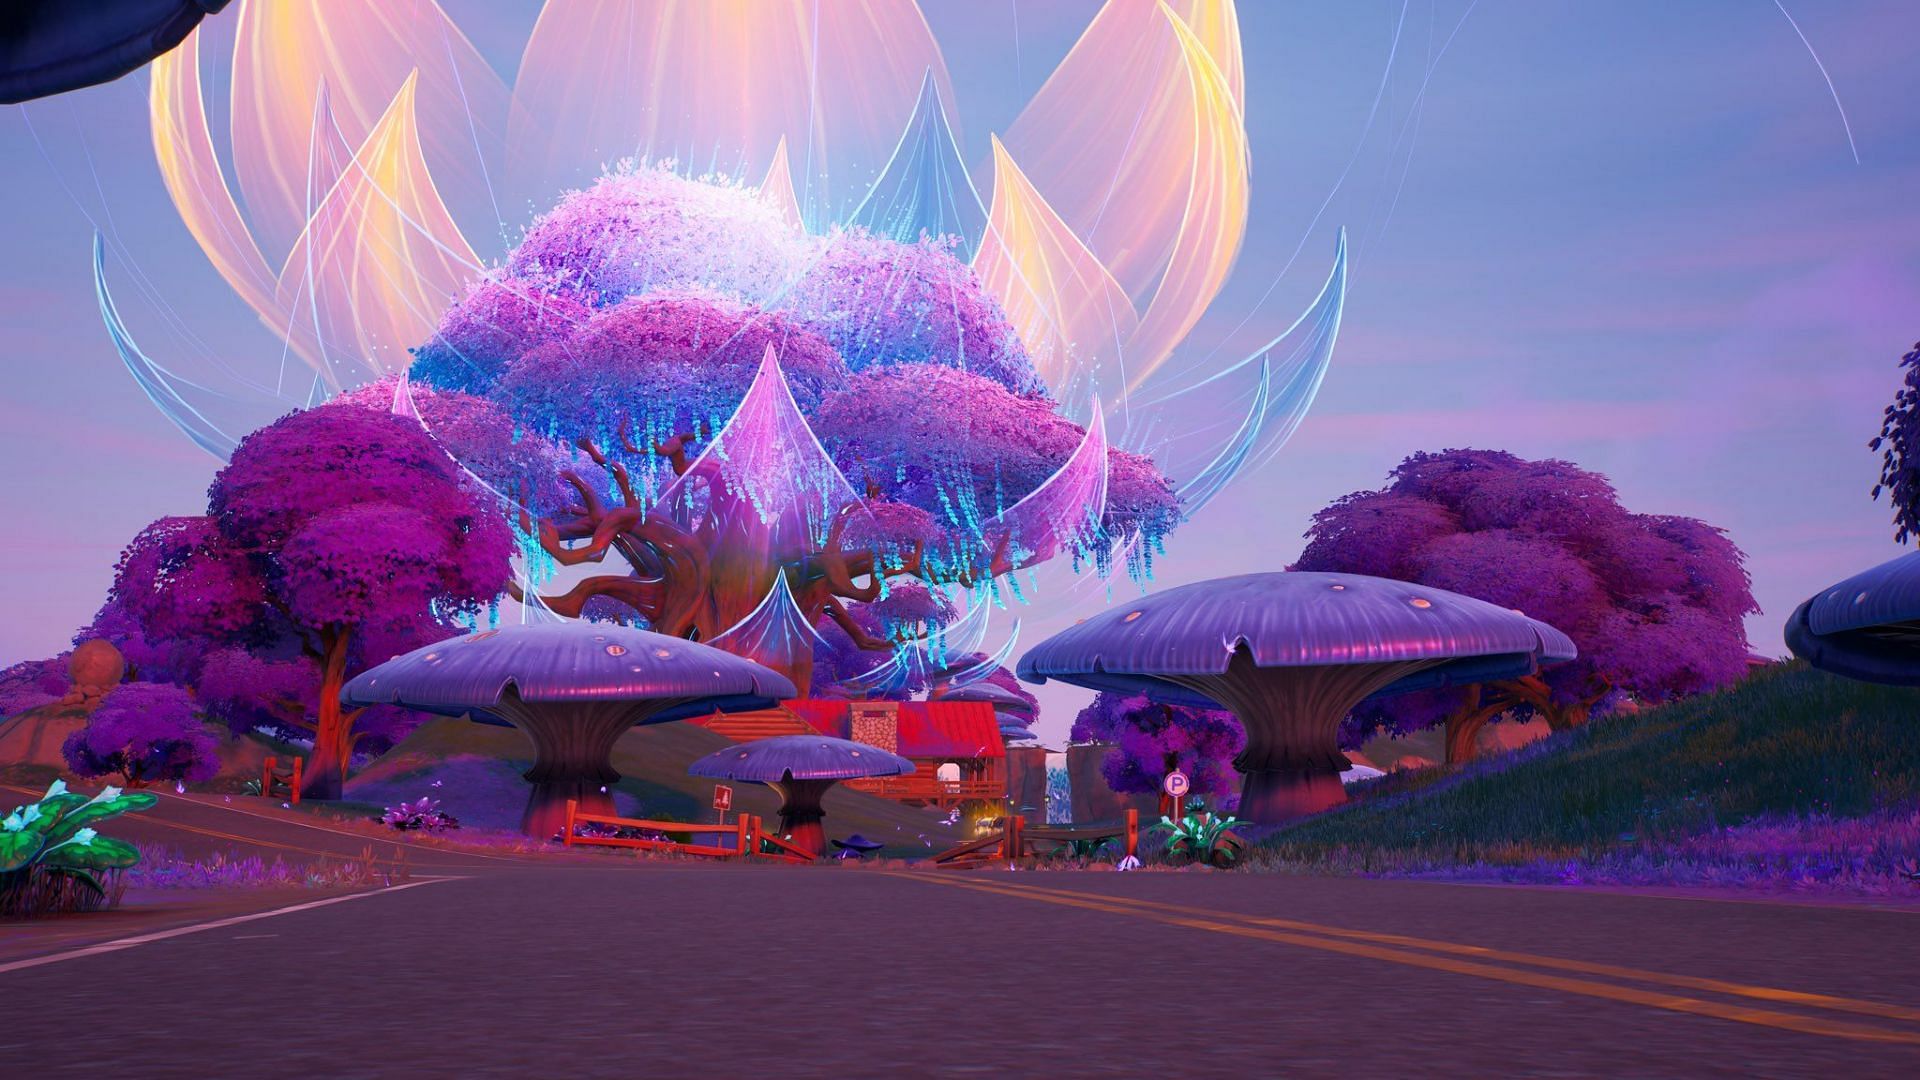 The Reality Tree holds a dark secret in Fortnite Chapter 3 Season 3 (Image via Twitter/DragonZombified)